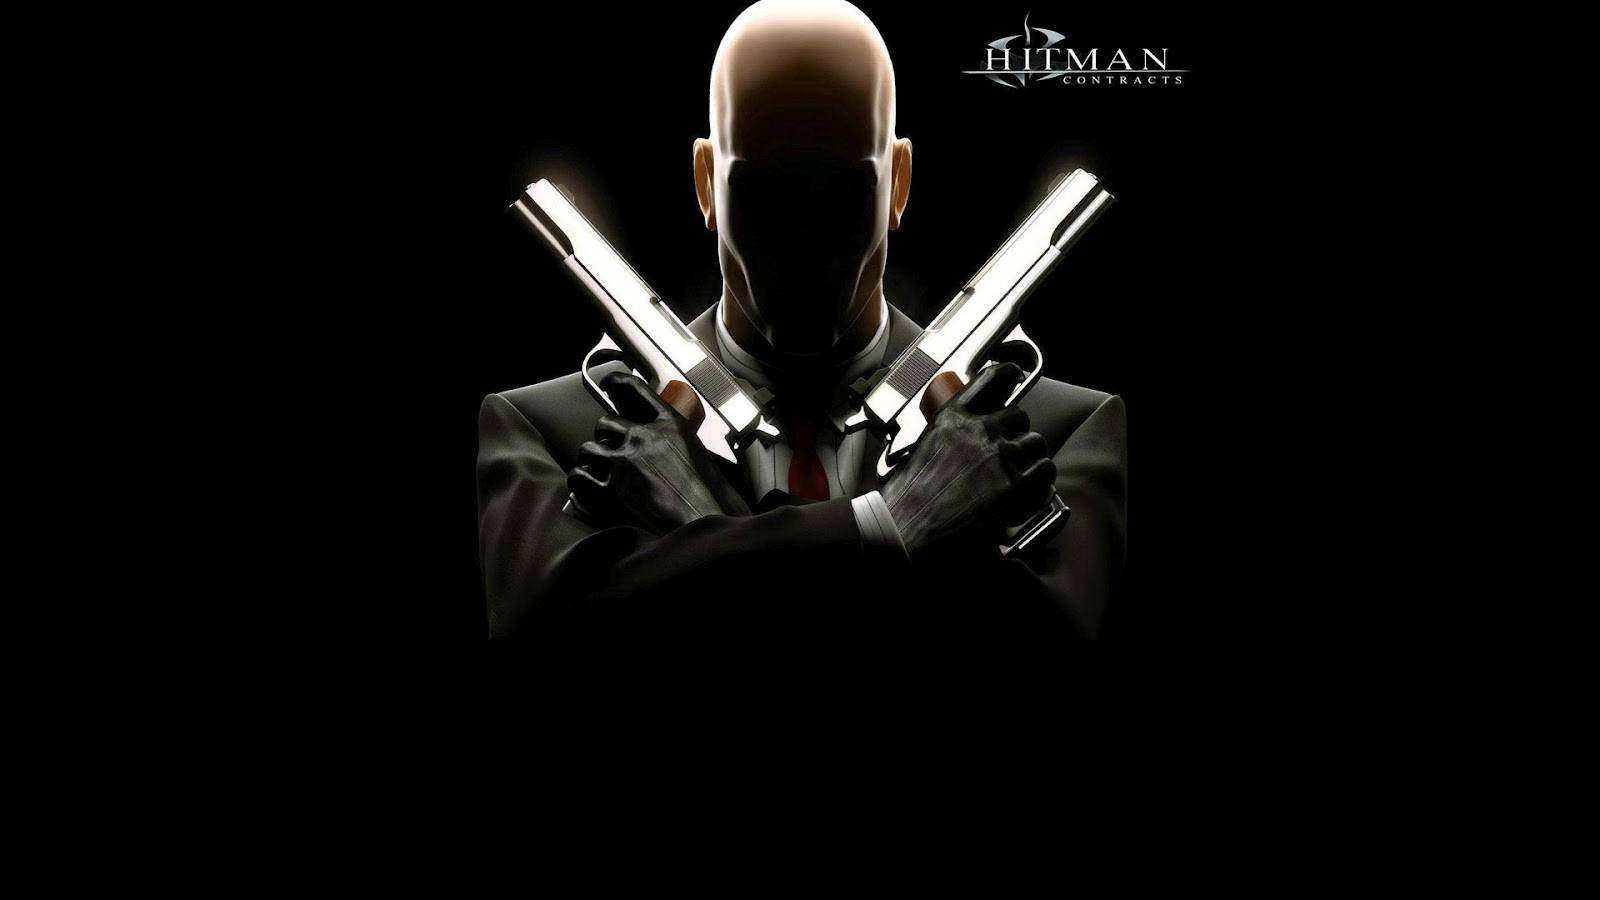 The Elite Hitman Agent from 'Hitman Contracts' Wallpaper